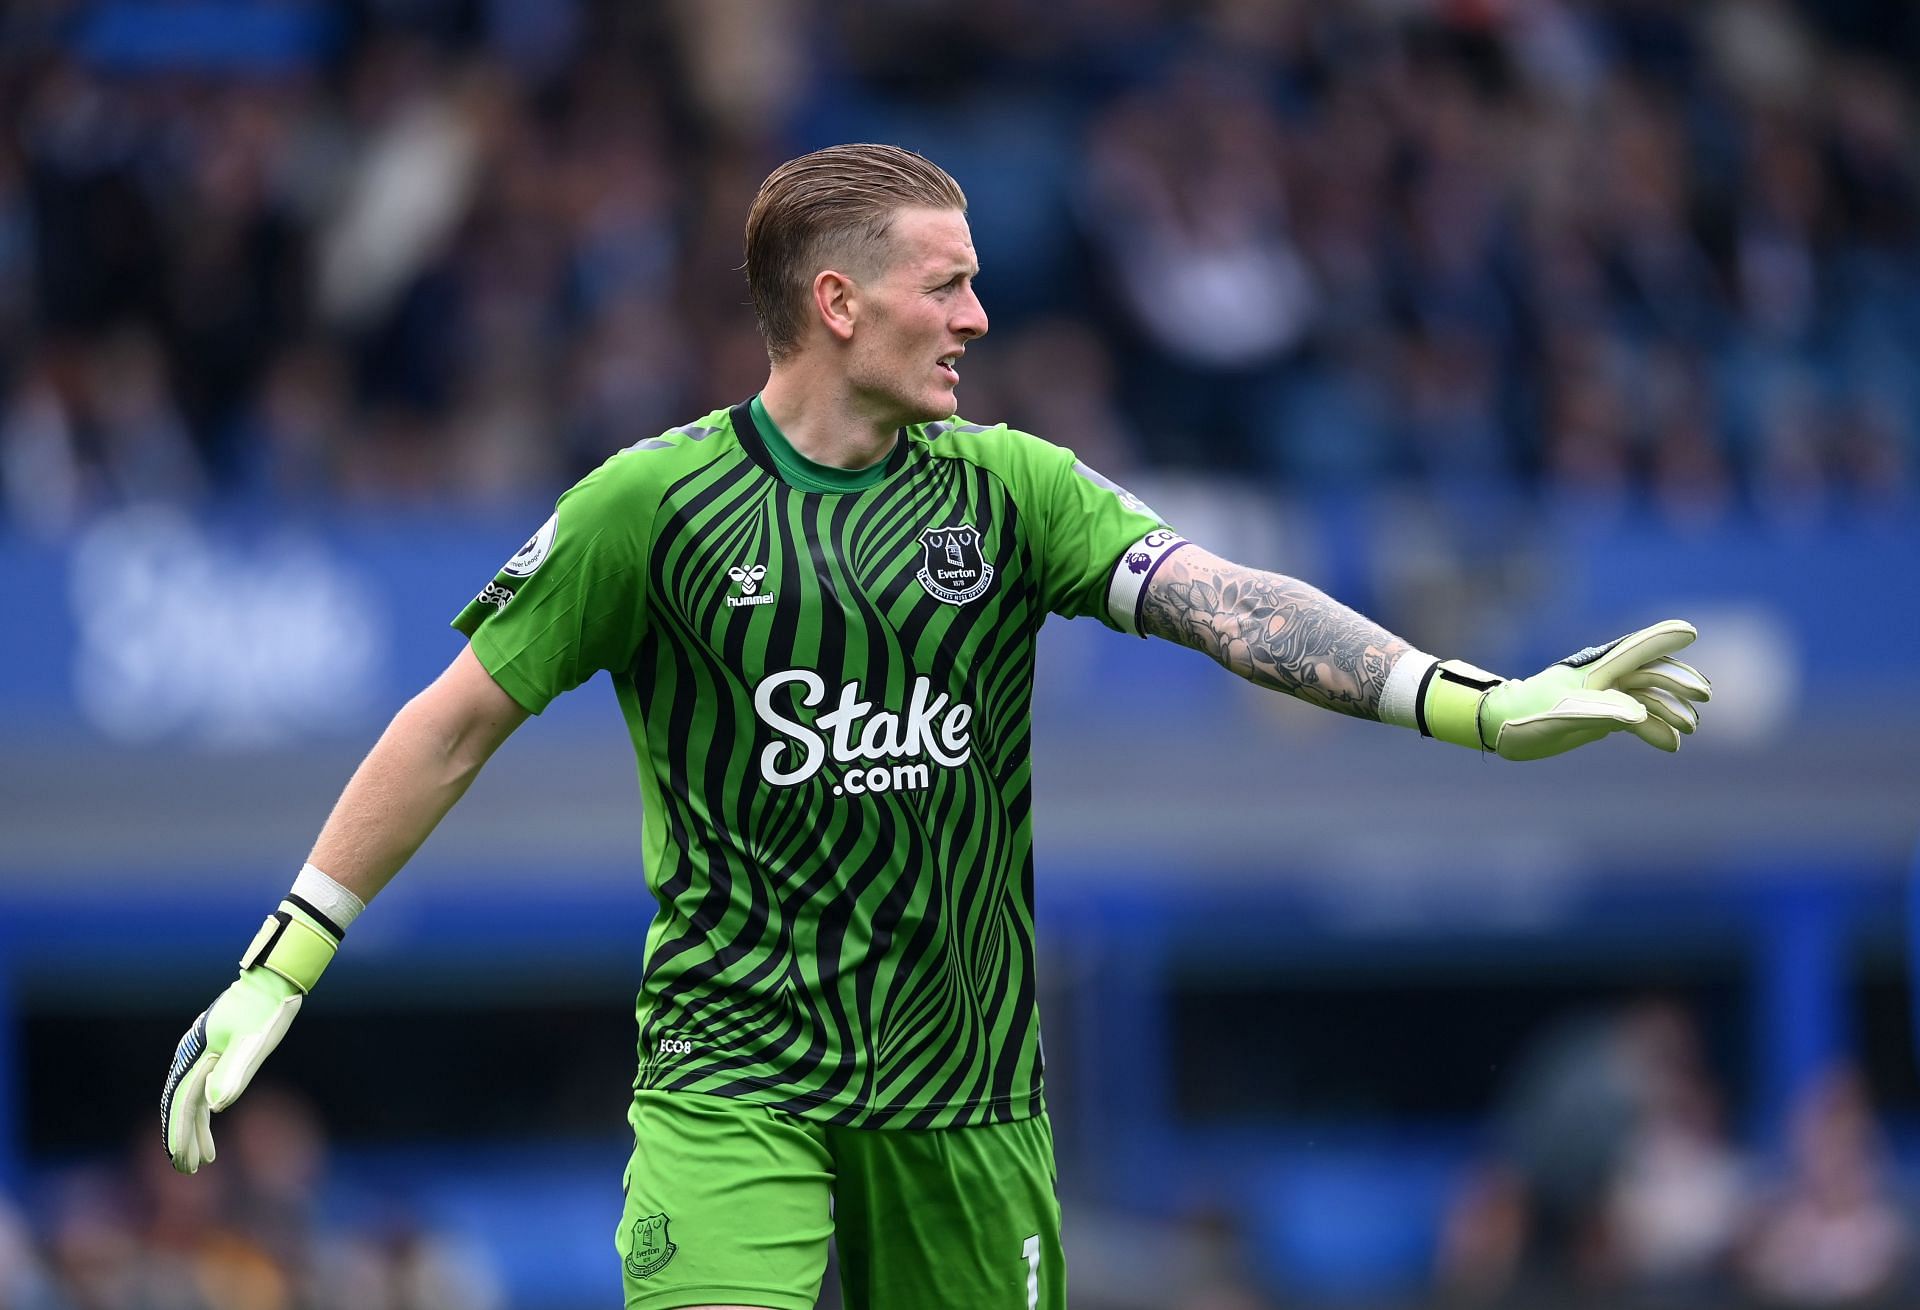 Pickford made eight saves for Everton against Liverpool in the Premier League